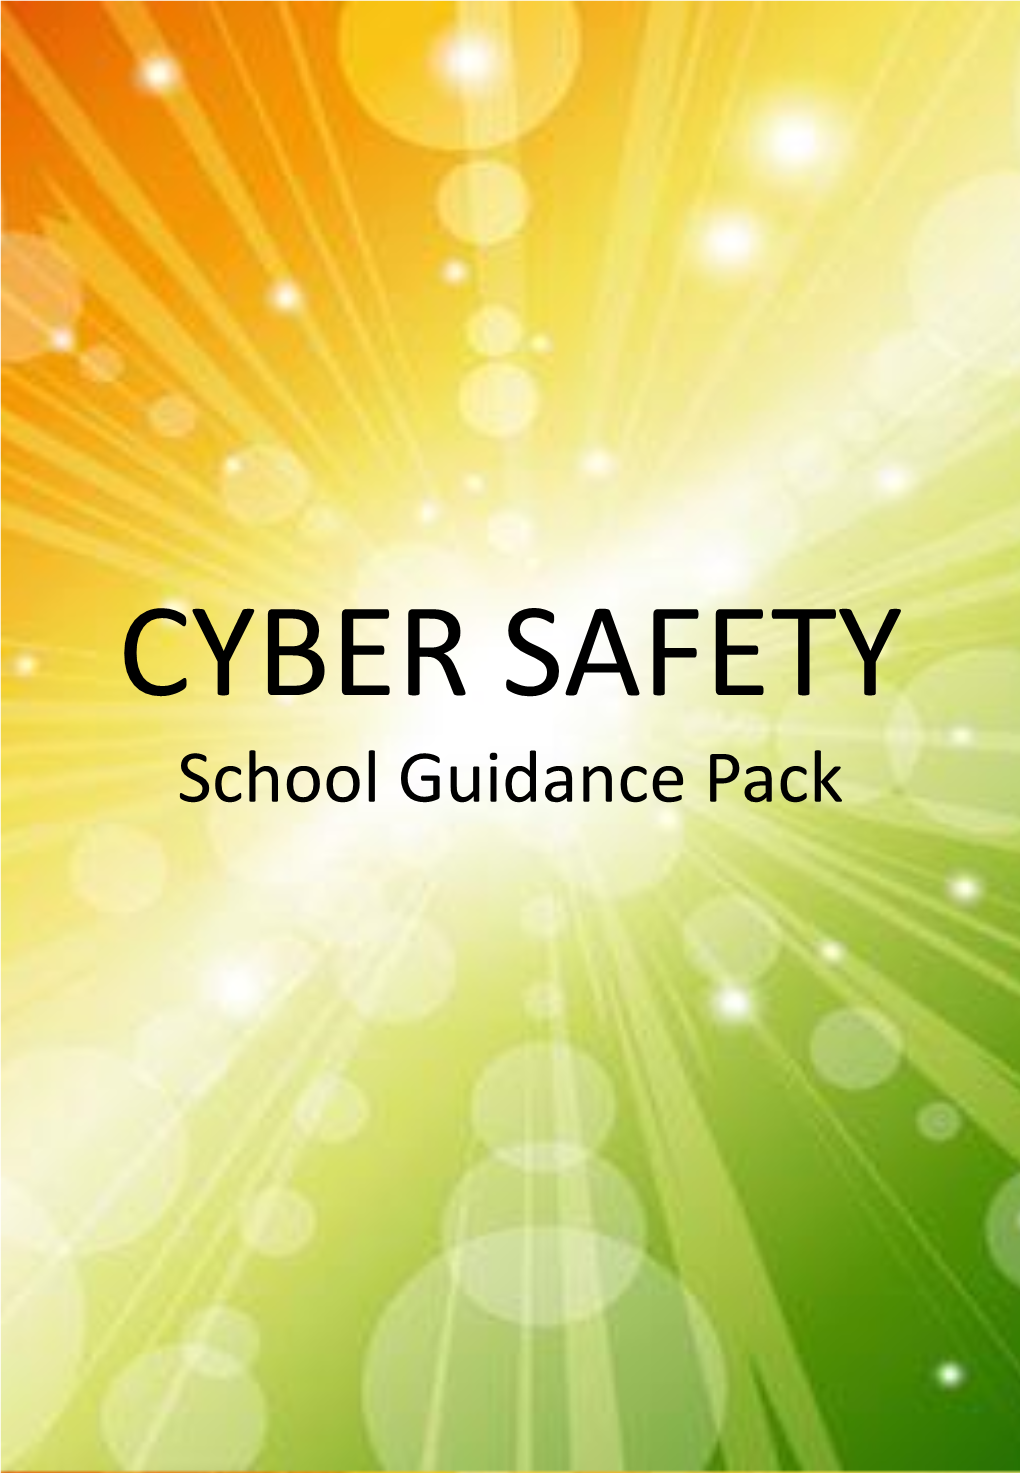 CYBER SAFETY School Guidance Pack